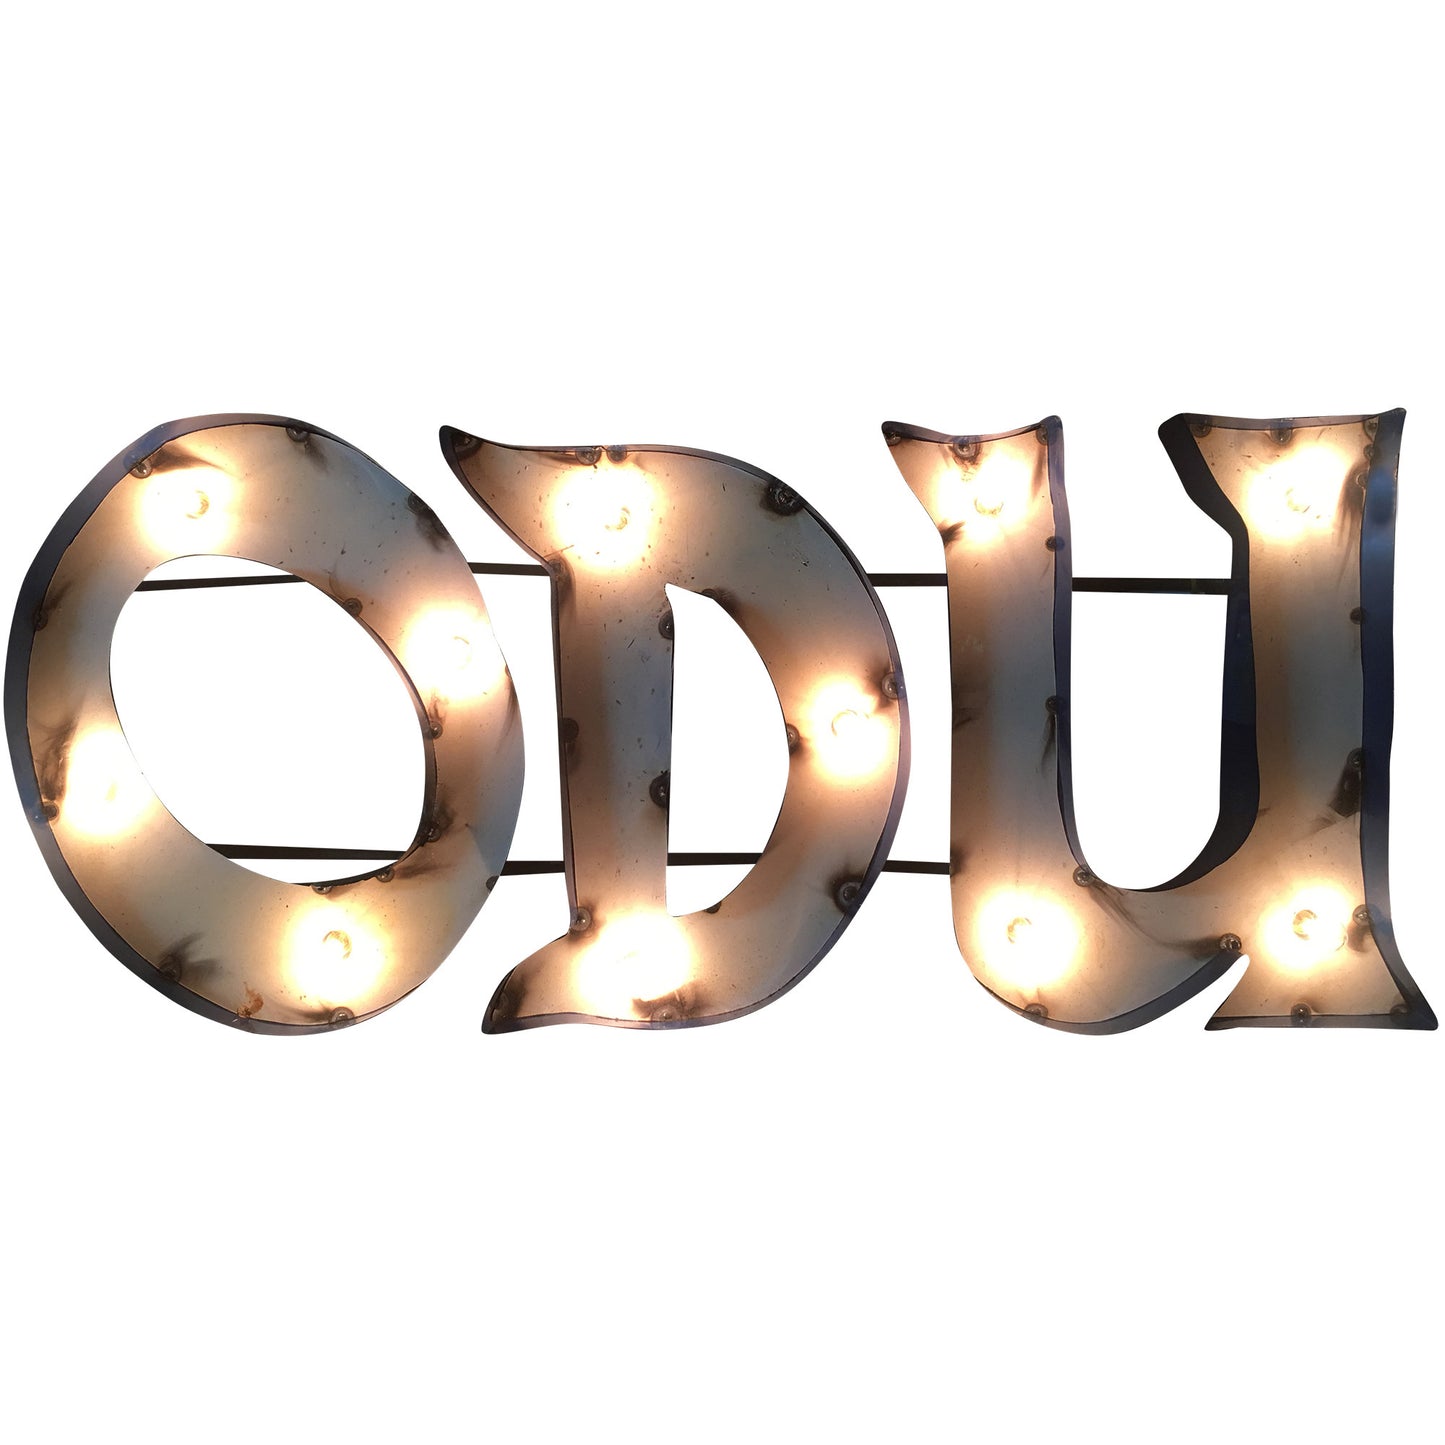 Old Dominion University "ODU" Lighted Recycled Metal Wall Decor